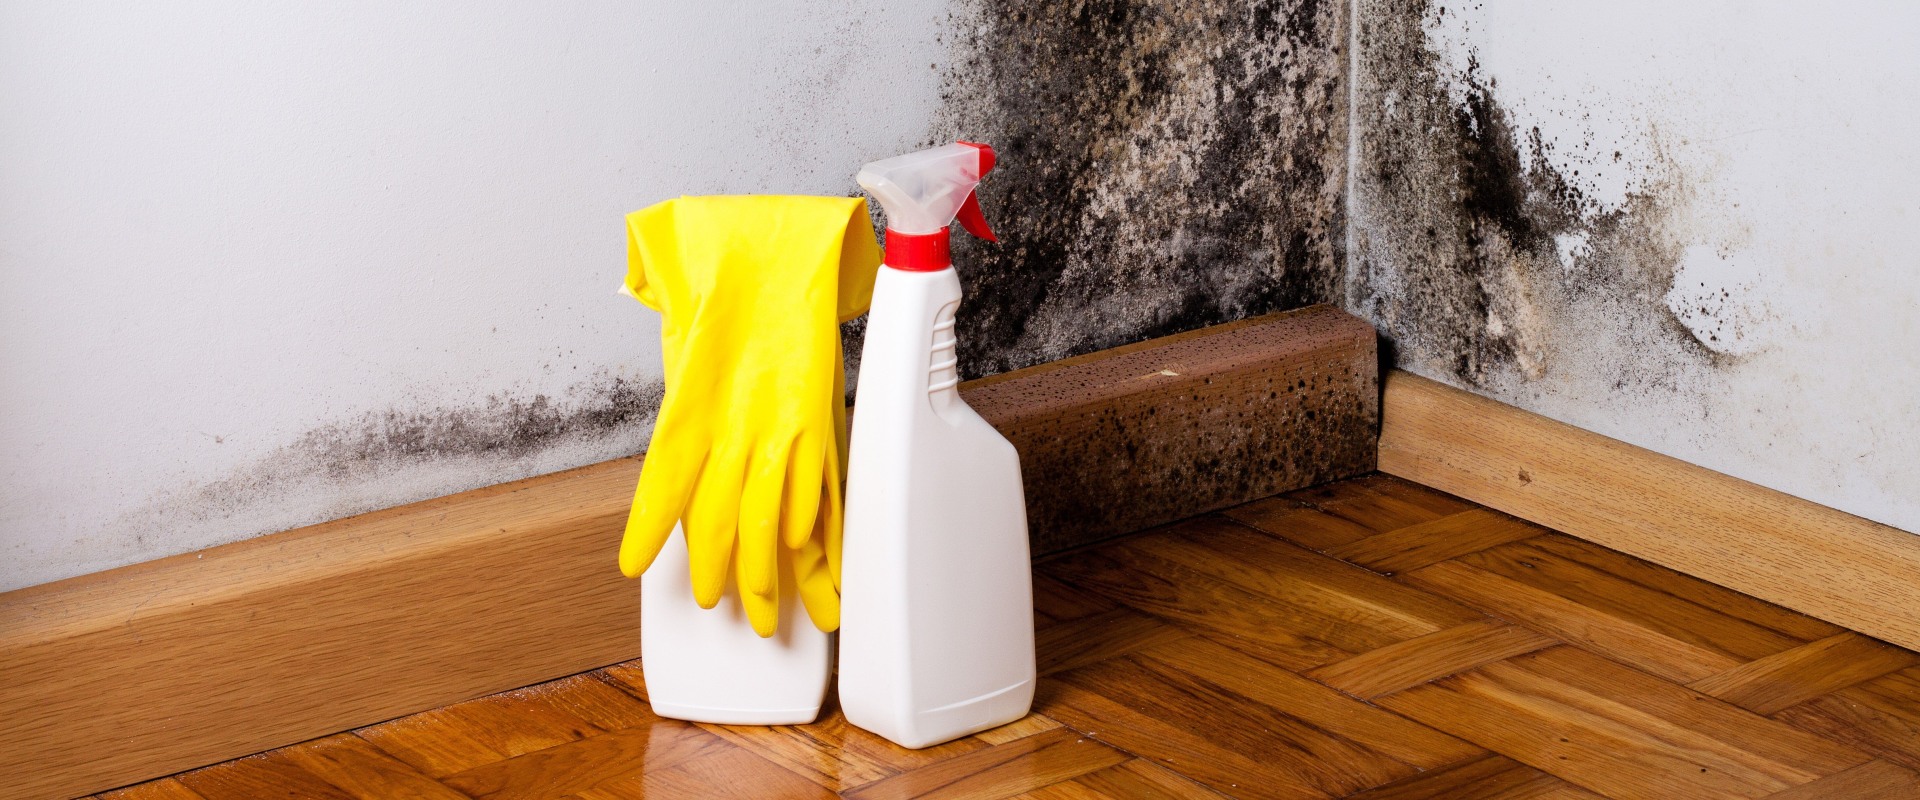 How long does it take to get rid of mold in a house?